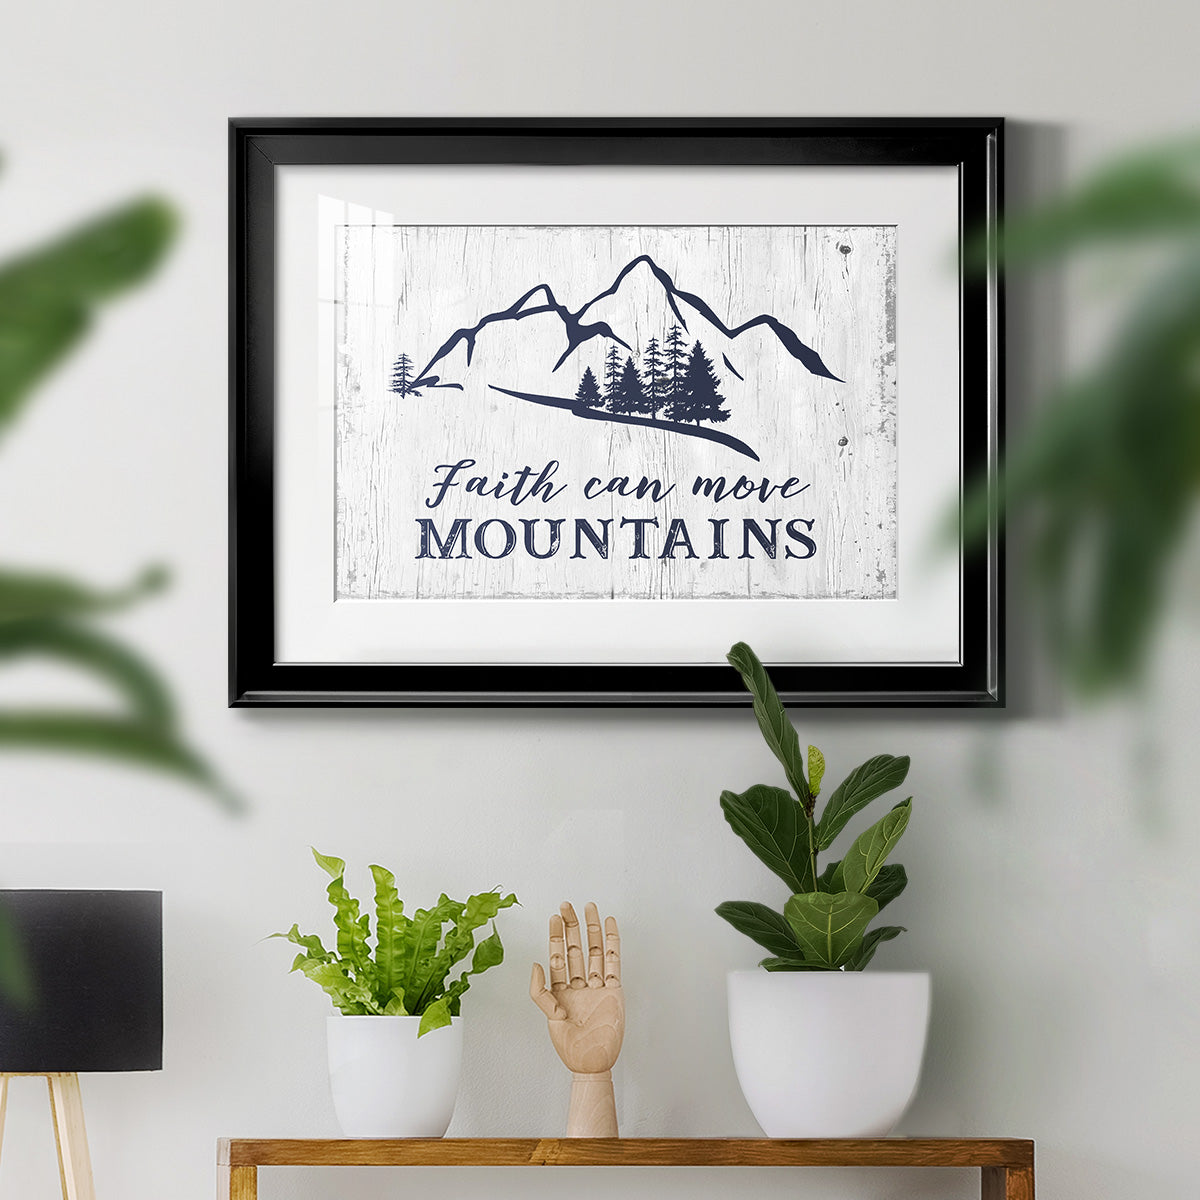 Move Mountains Premium Framed Print - Ready to Hang